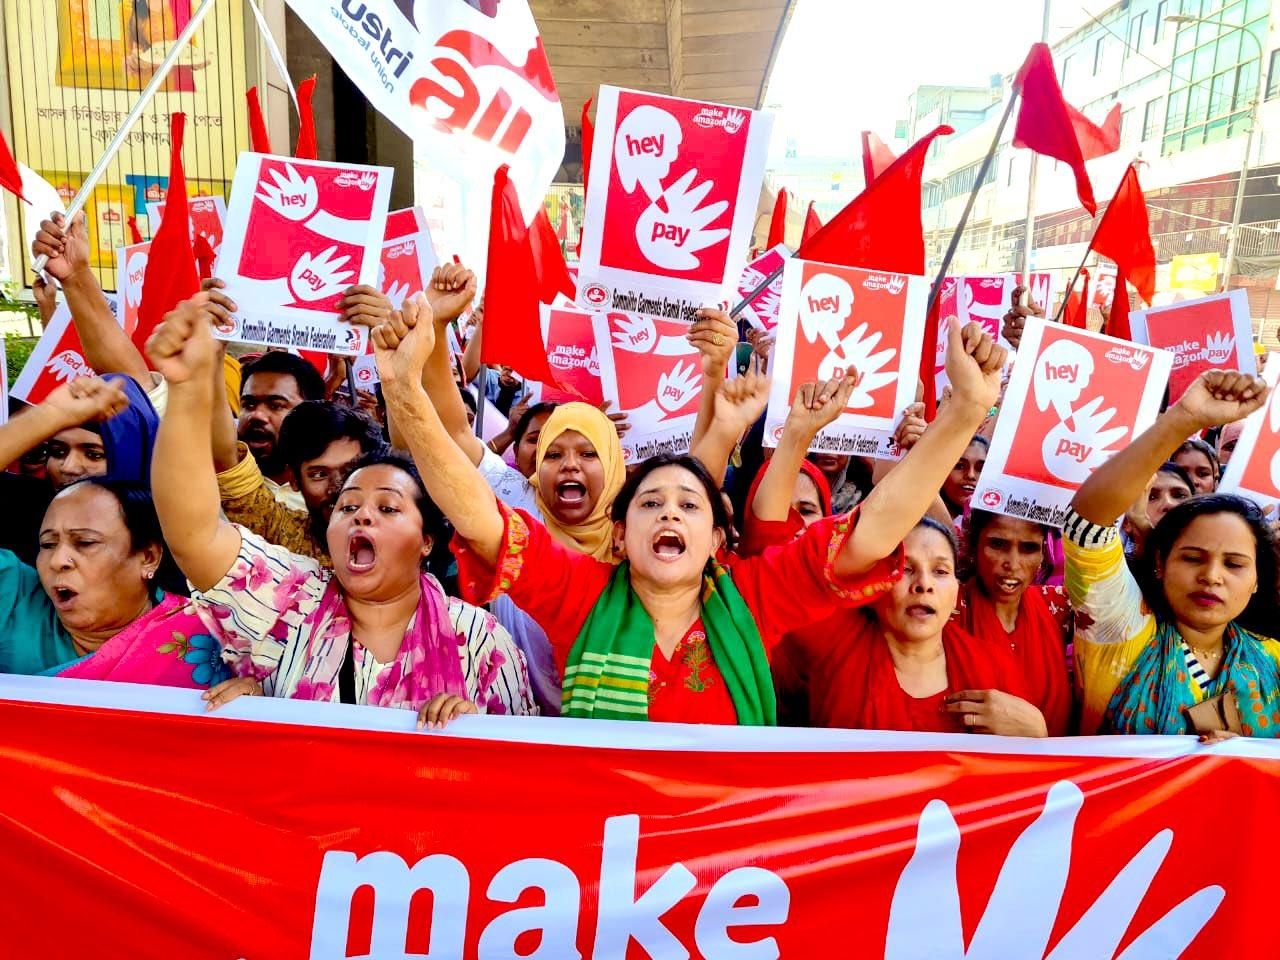 Garment workers in Bangladesh take part in a protest